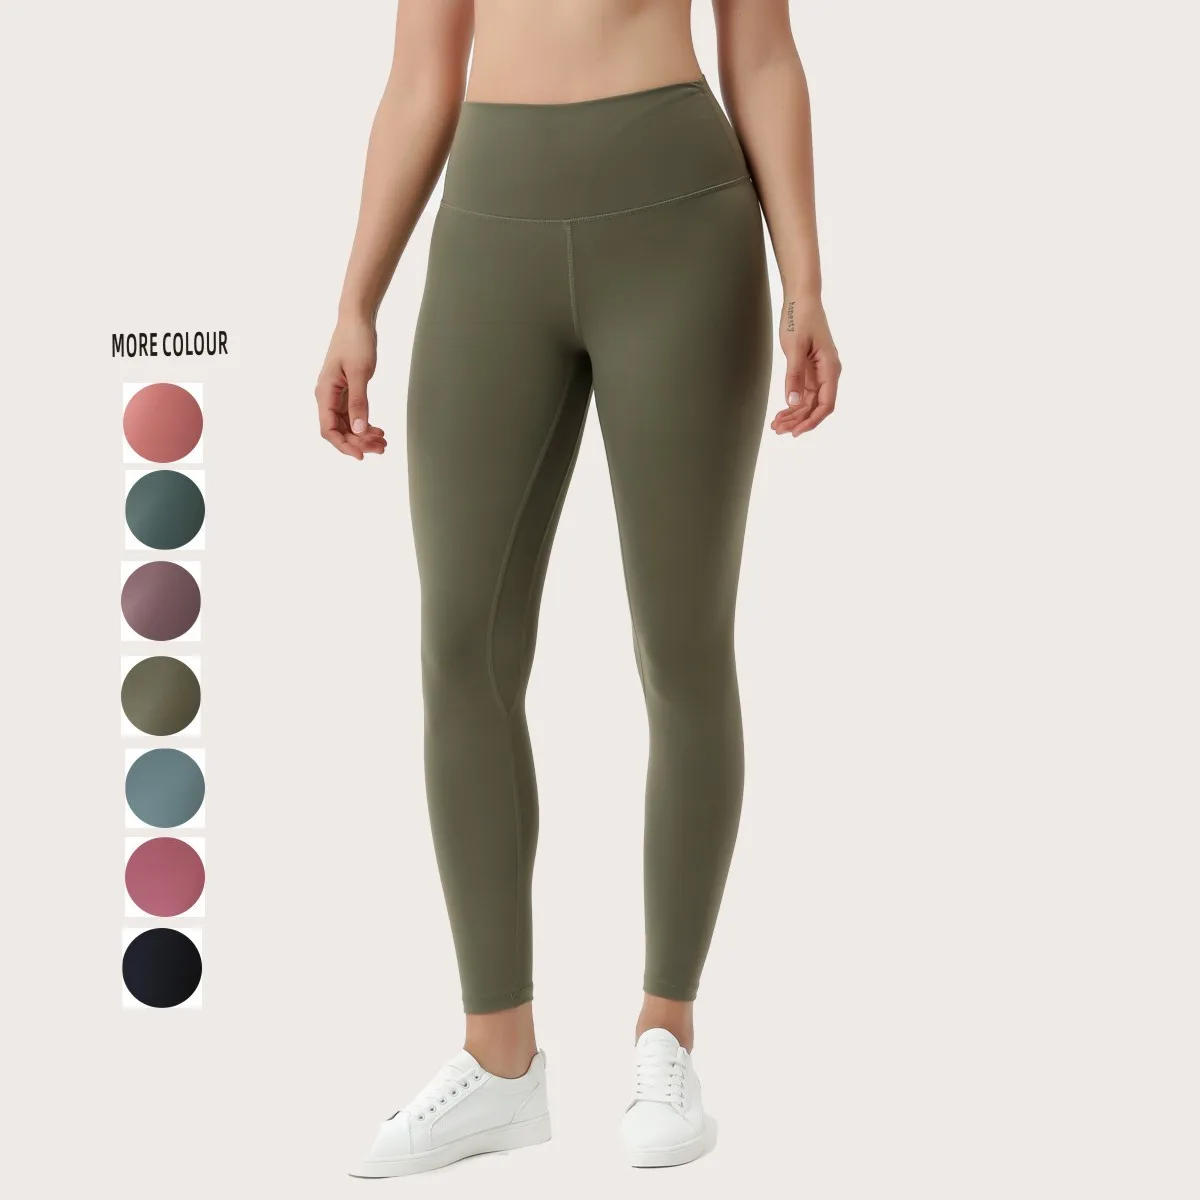 Chinese Sexy Yoga Pants For Women Mesh Leggings With Side Yoga Pants For Sex Yoga Pants image